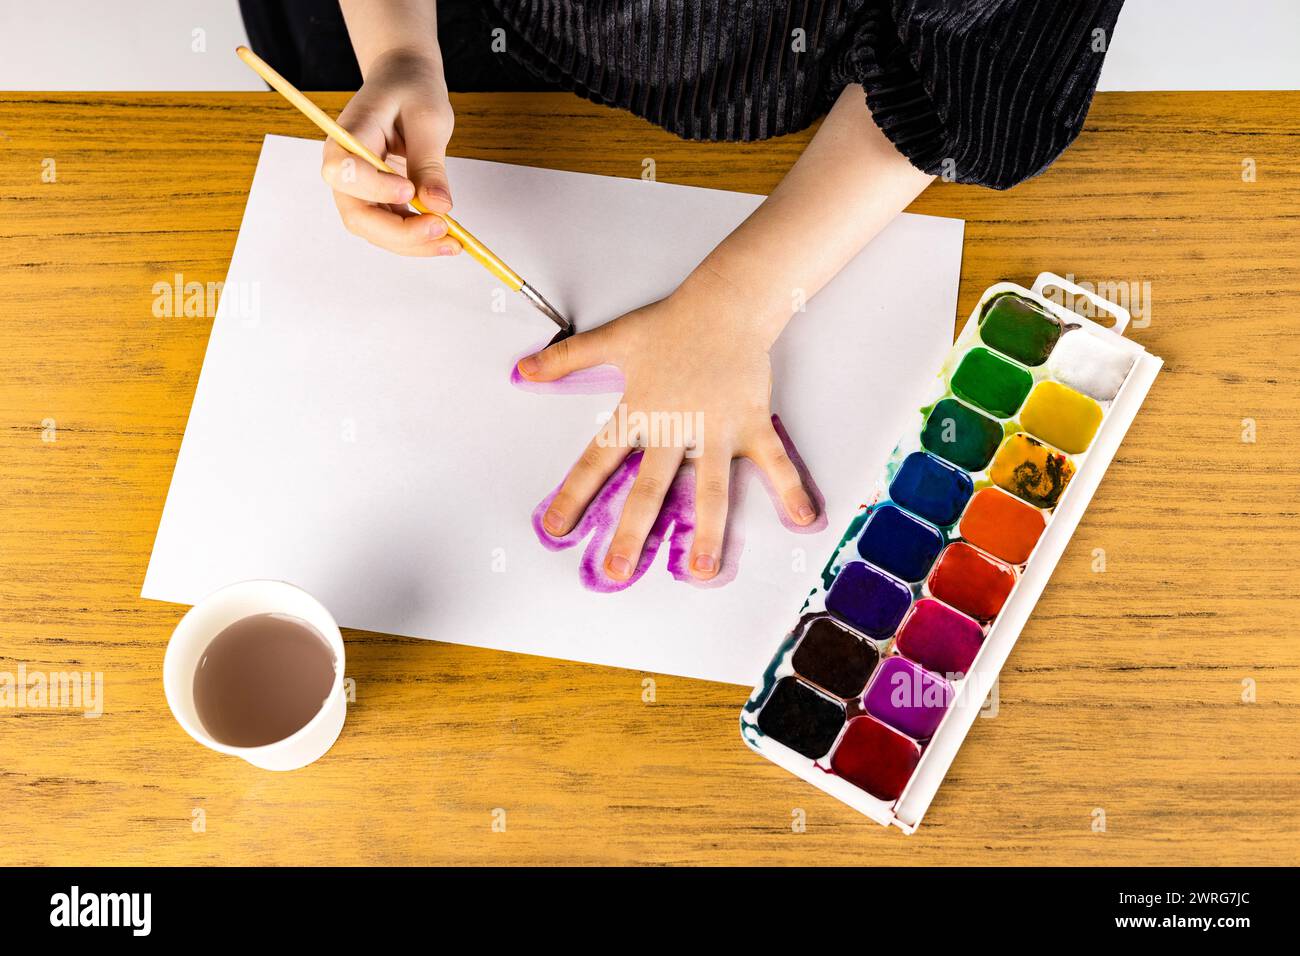 A person is painting a hand with watercolors on a piece of paper placed on a hardwood table. The paintbrush is held delicately between their fingers Stock Photo